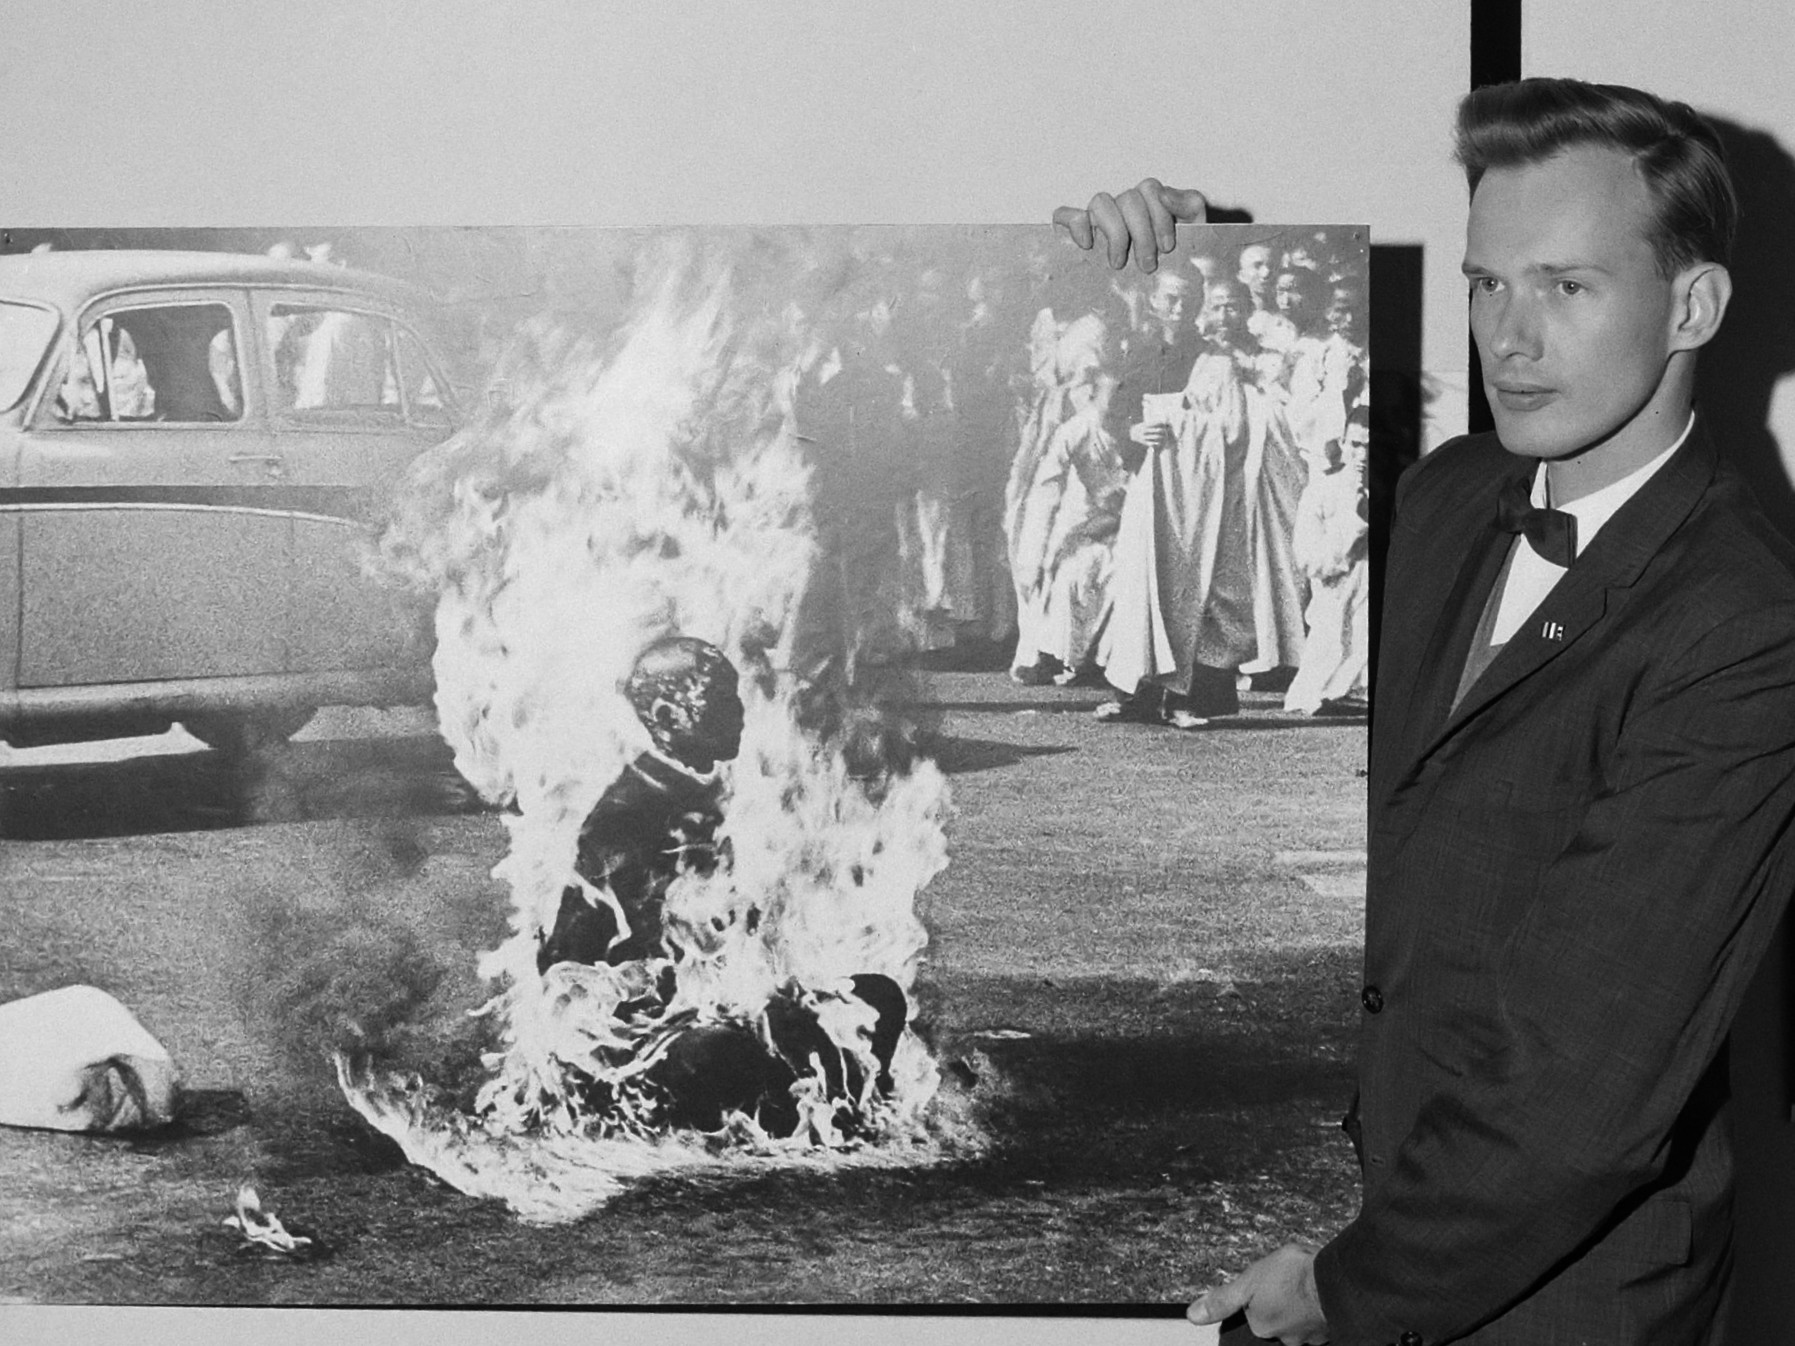 World Press Photo 1963: Malcolm W. Brown (13 December 1963). Source: Nationaal Archief, CC BY-SA 3.0